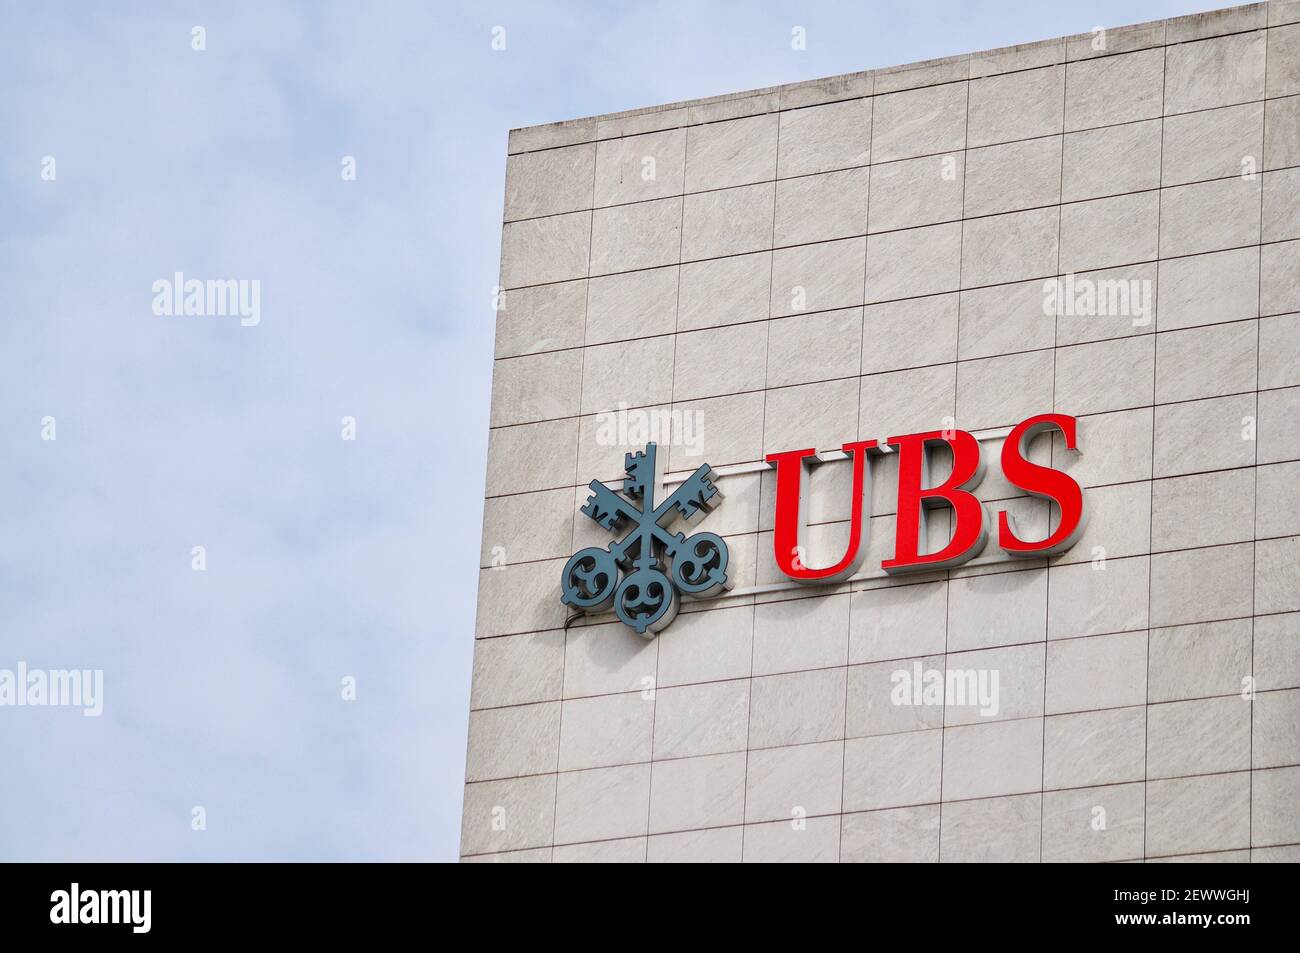 Zug, Switzerland - 26th February 2021 : UBS Bank logo sign hanging on a building facade in Zug. UBS is one of the leading banks in Switzerland and in Stock Photo